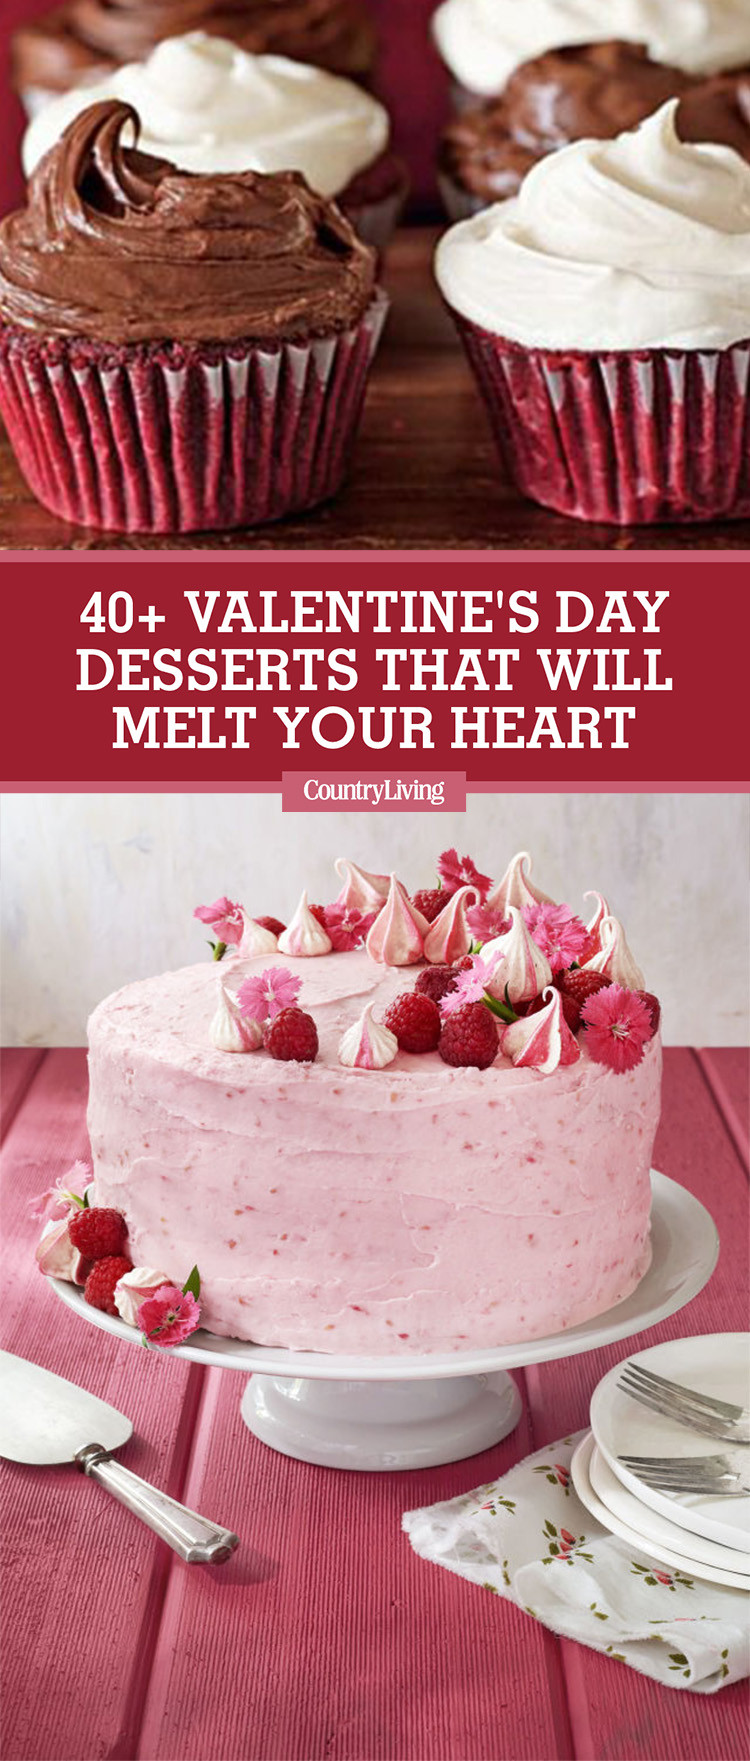 Valentines Desserts Recipes With Pictures
 42 Easy Valentine’s Day Desserts Best Recipes for